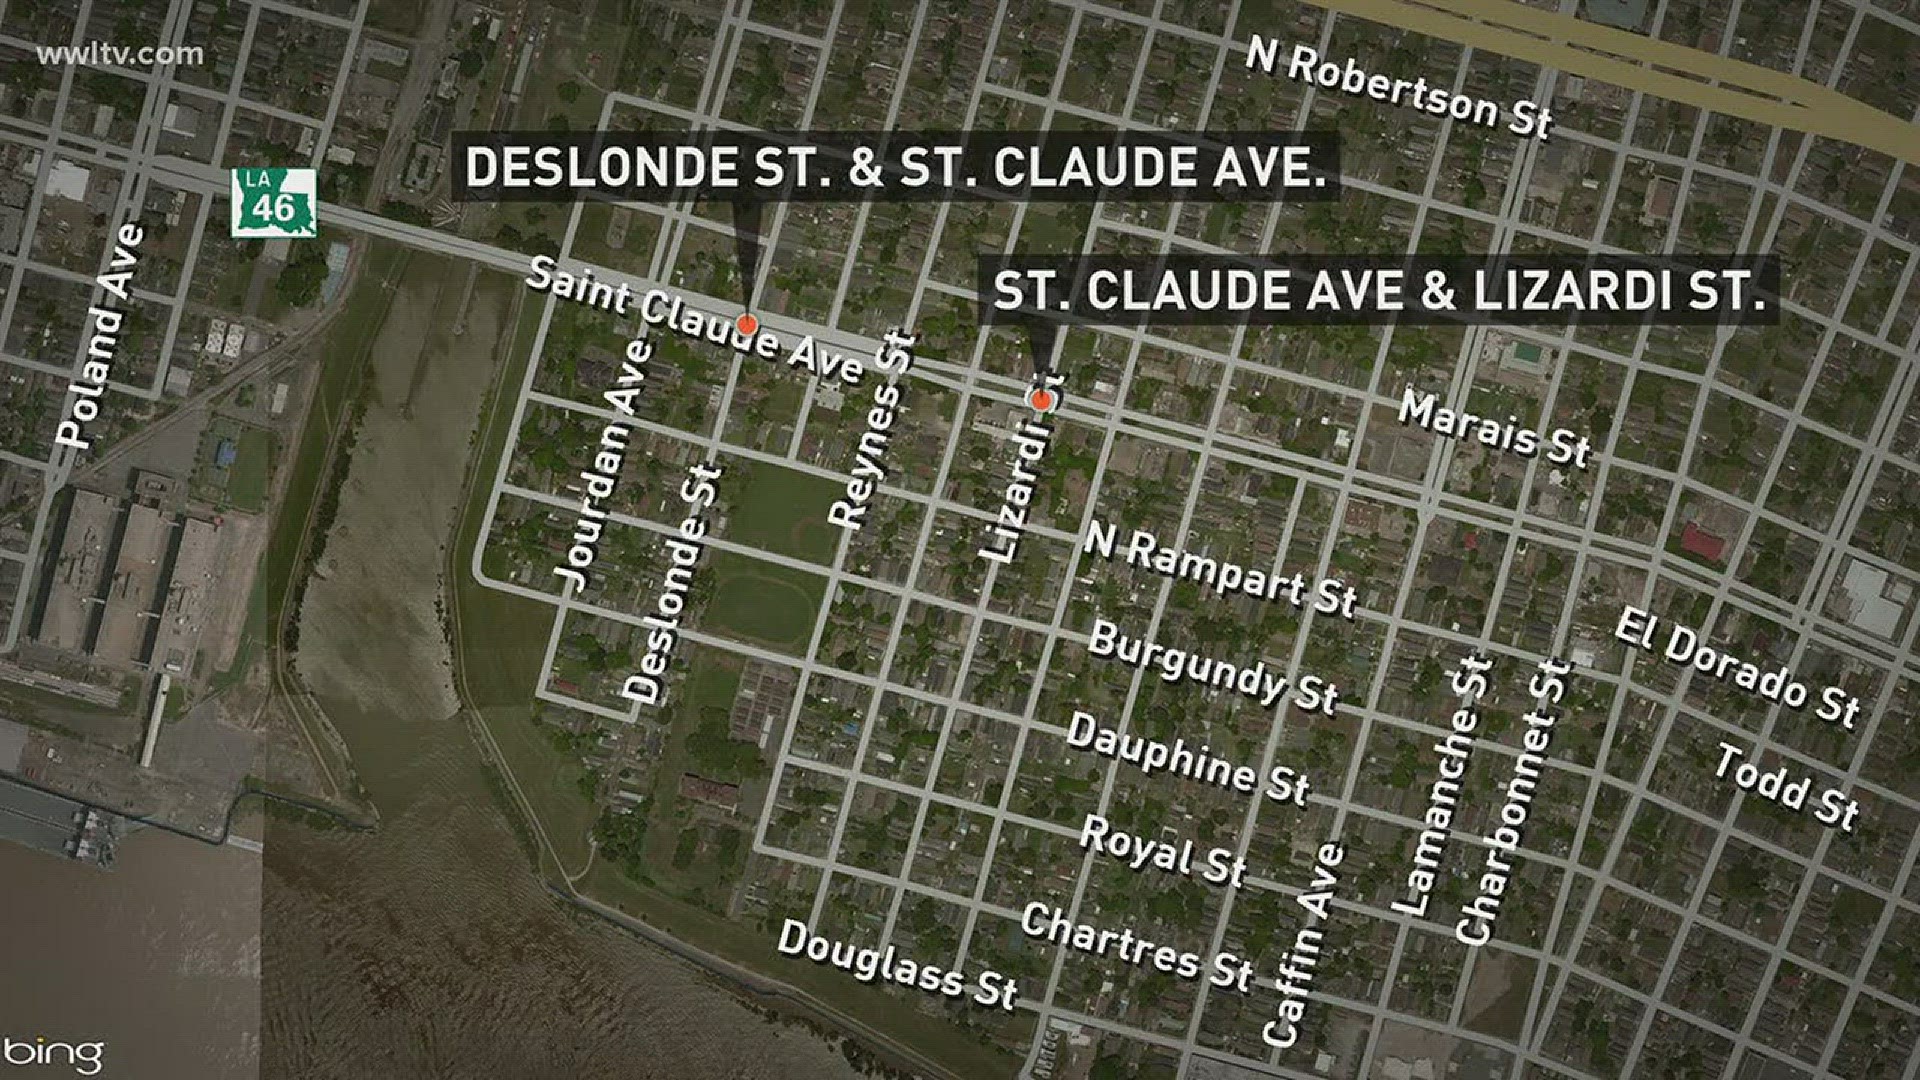 Two shootings four blocks apart on St. Claude Avenue